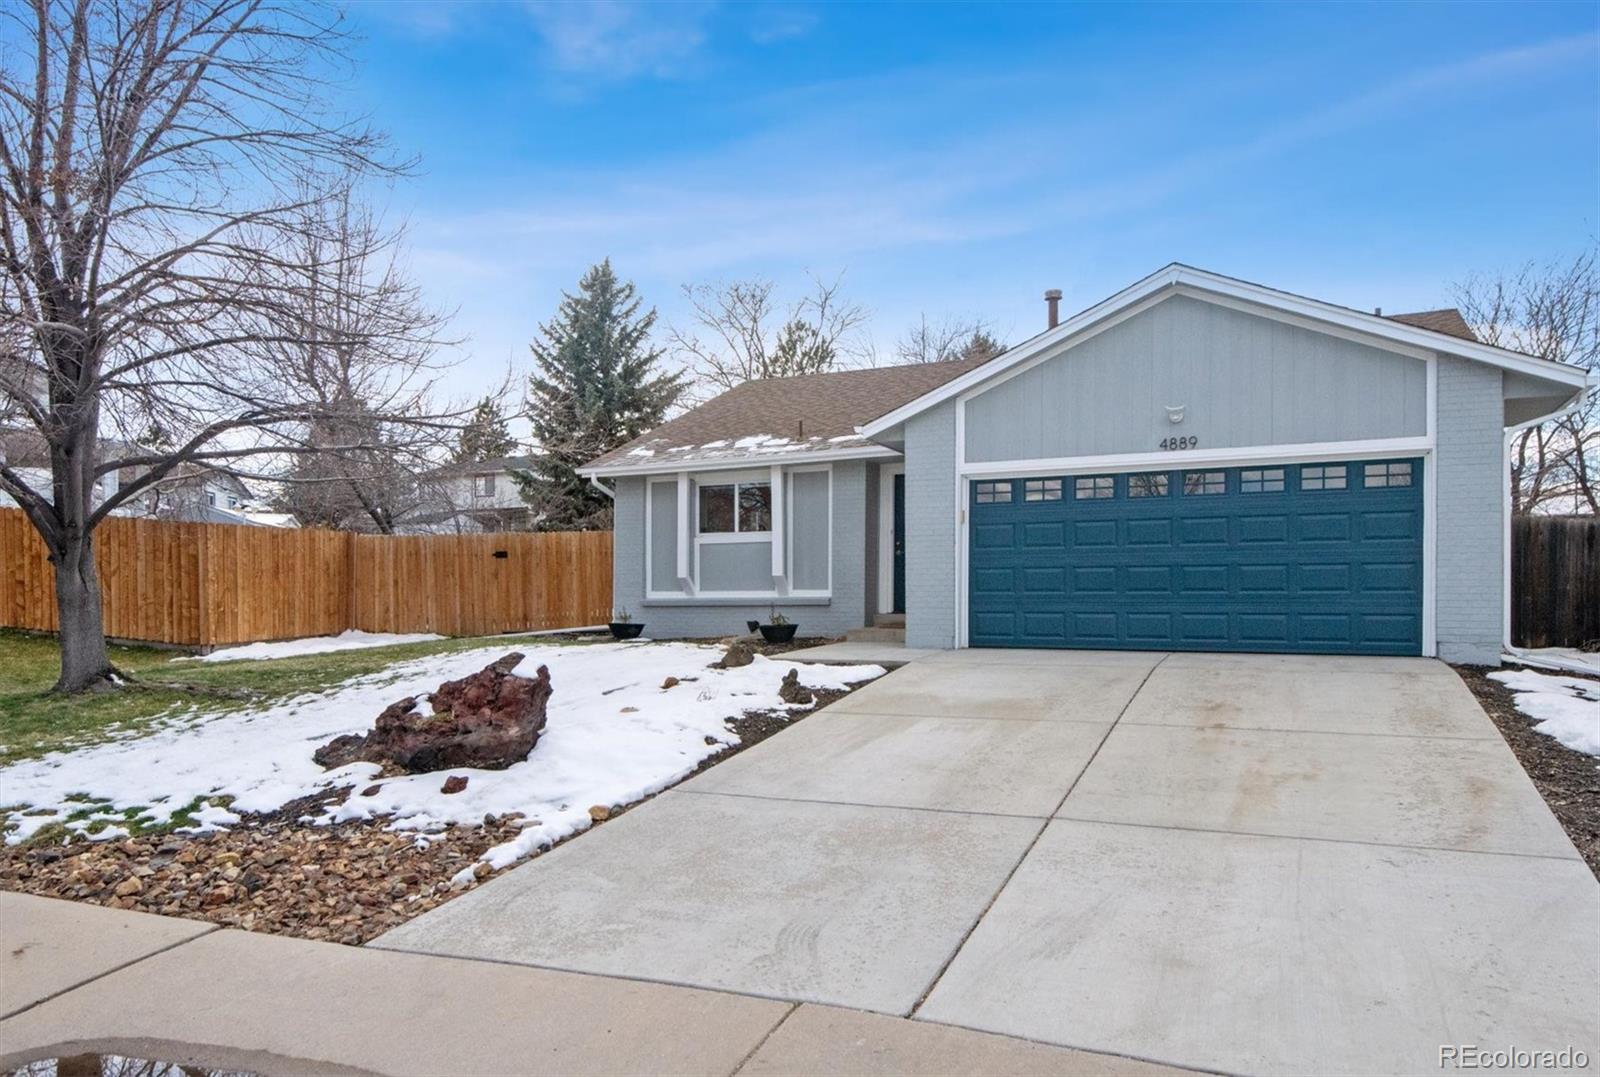 4889 s hoyt street, littleton sold home. Closed on 2024-05-10 for $500,000.